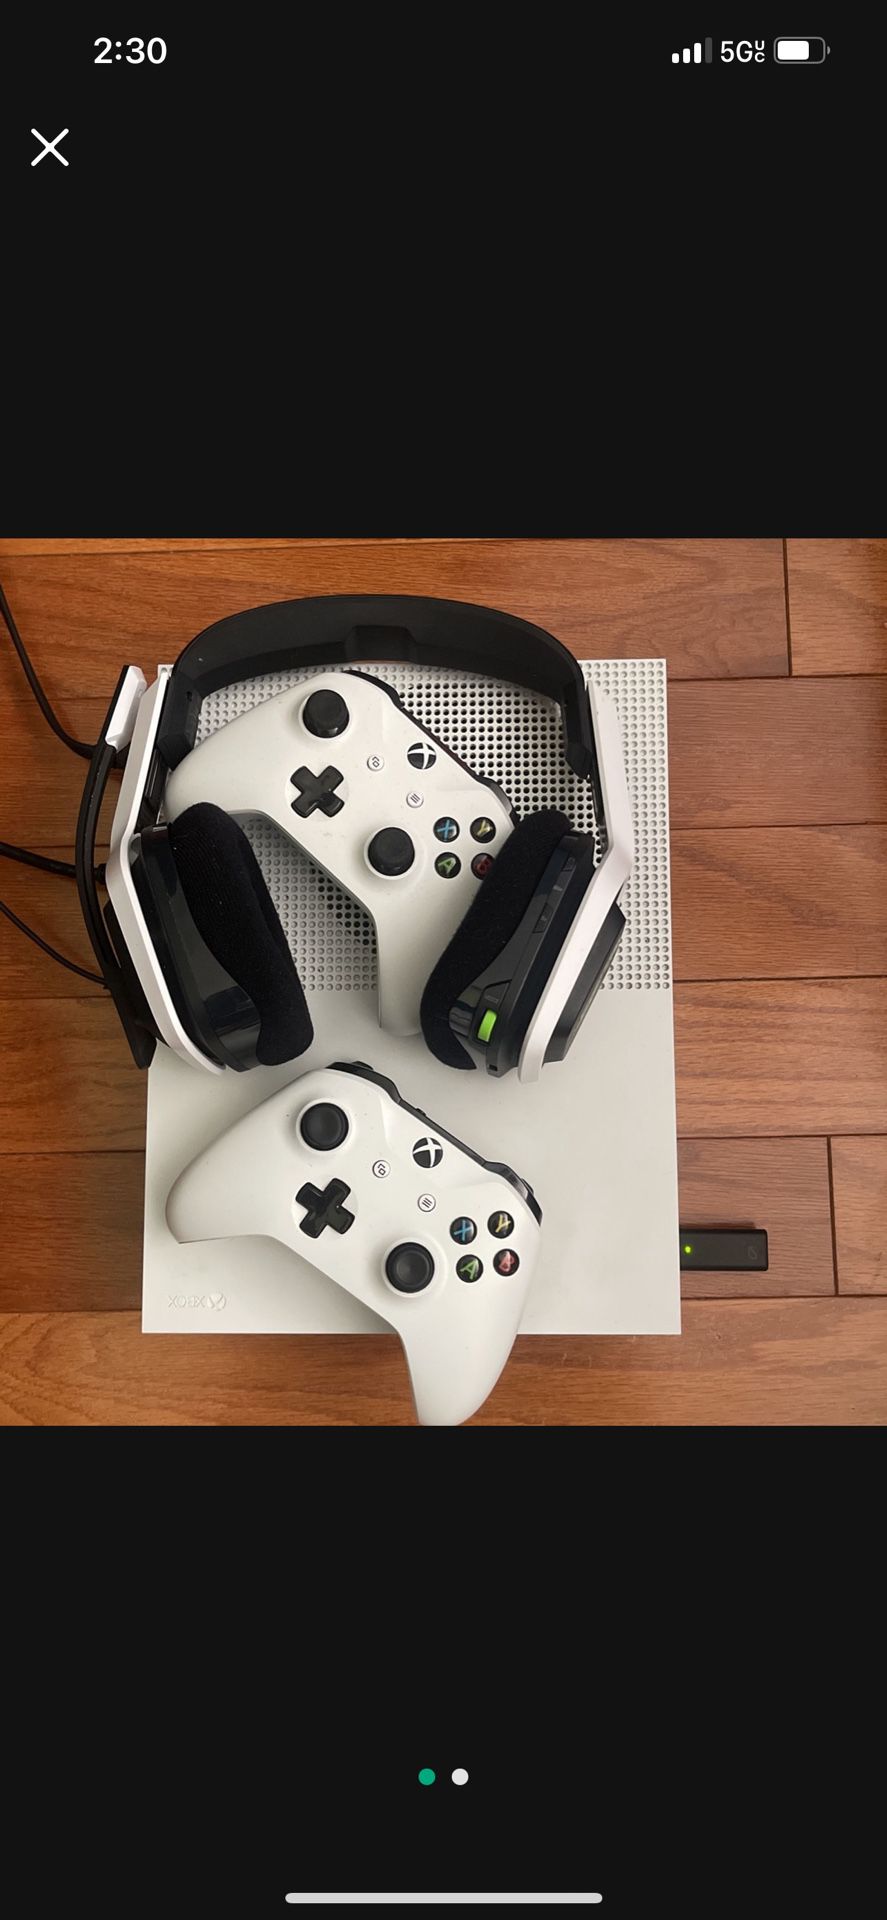 Xbox One S 500 GB, Two Controllers, and Wireless Headphones